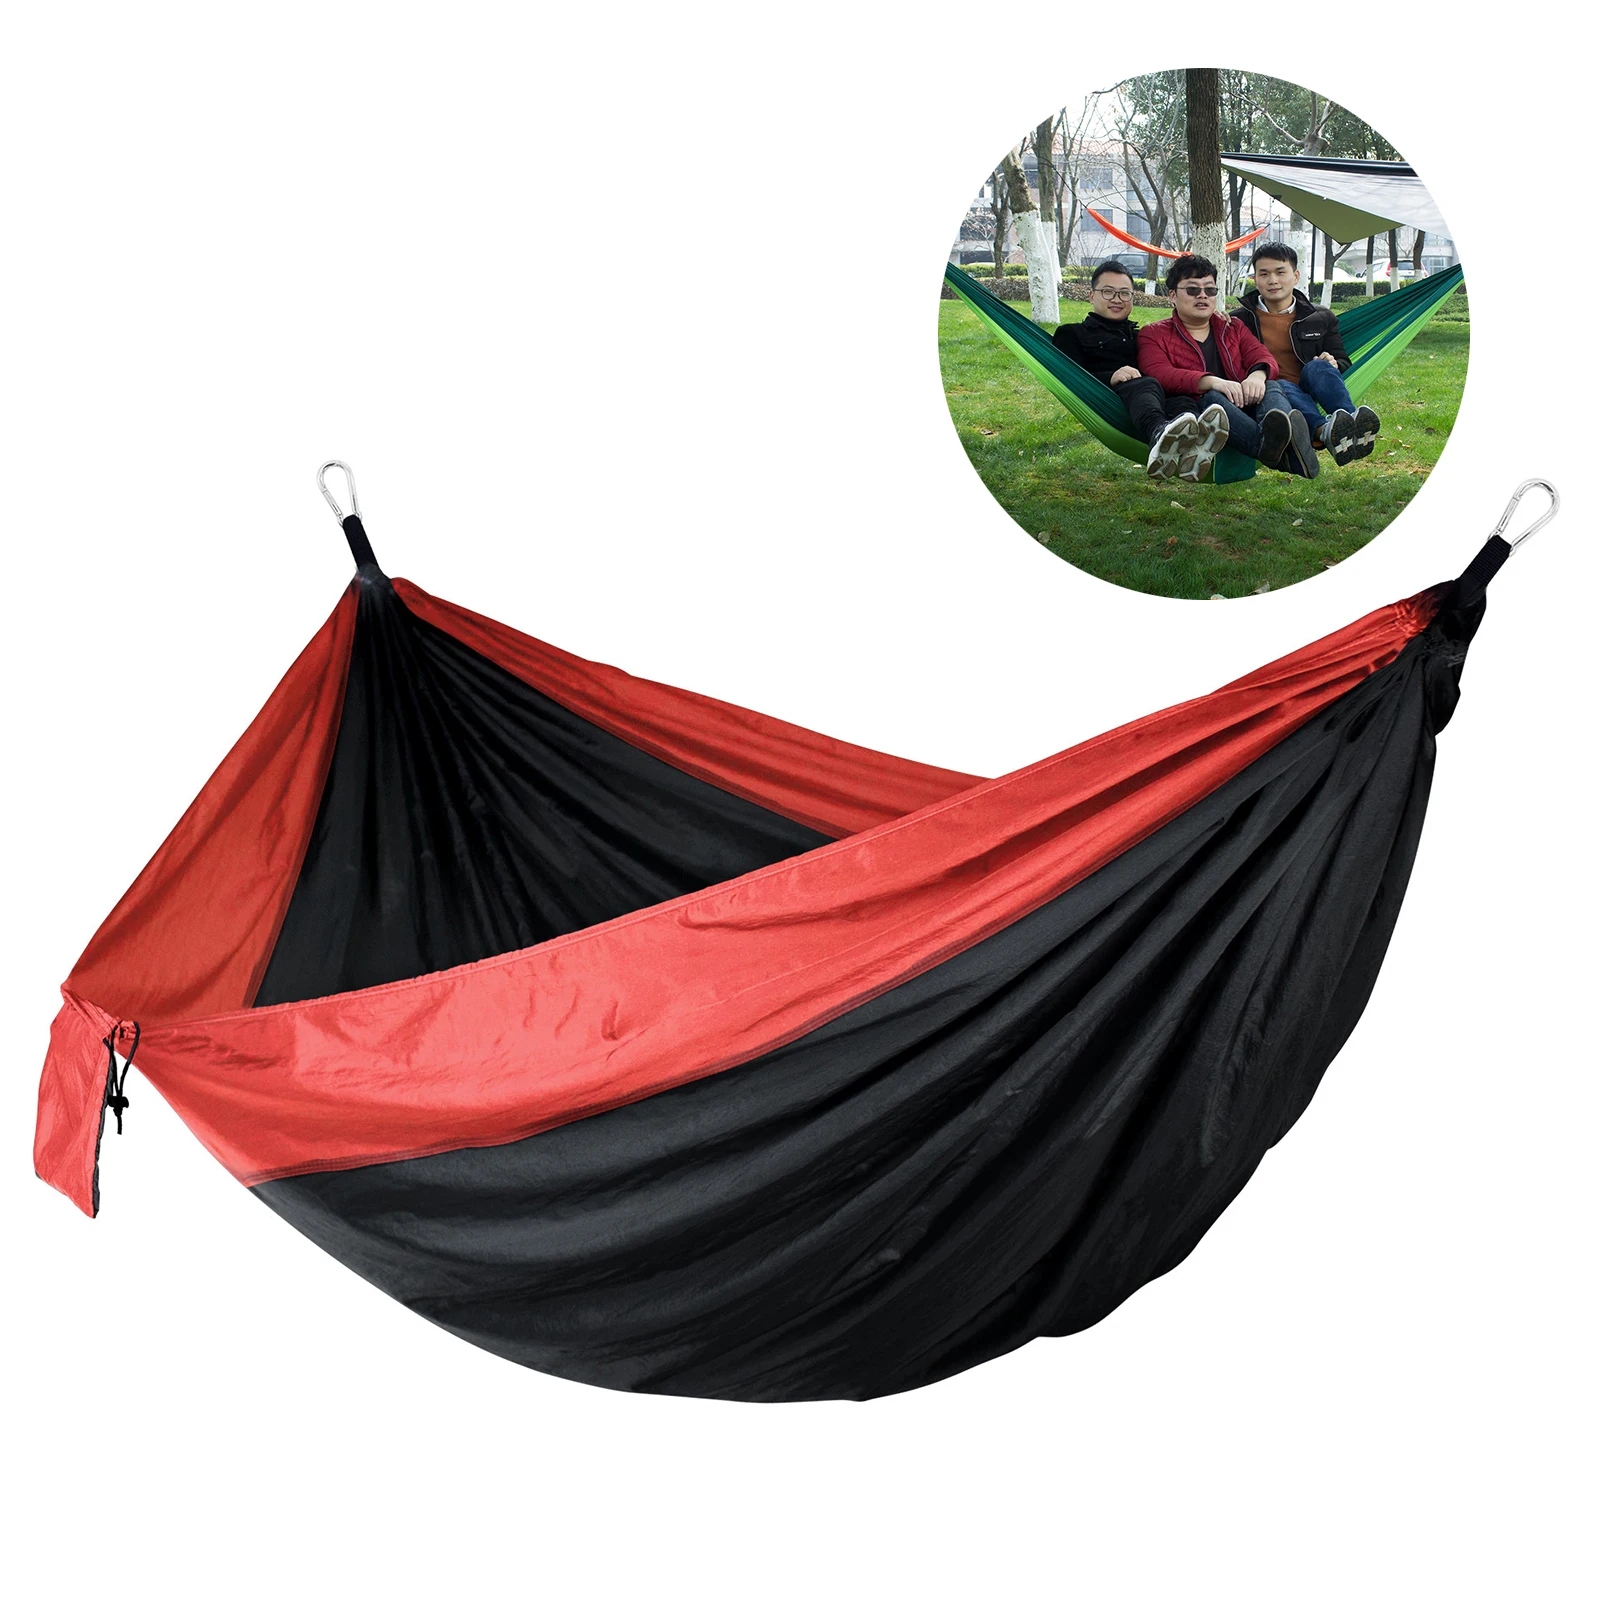 

Portable Double Person Thickened Large Camping Hammock With Tree Straps Outdoor Sports Nylon Hiking Wear Resistant Easy Install